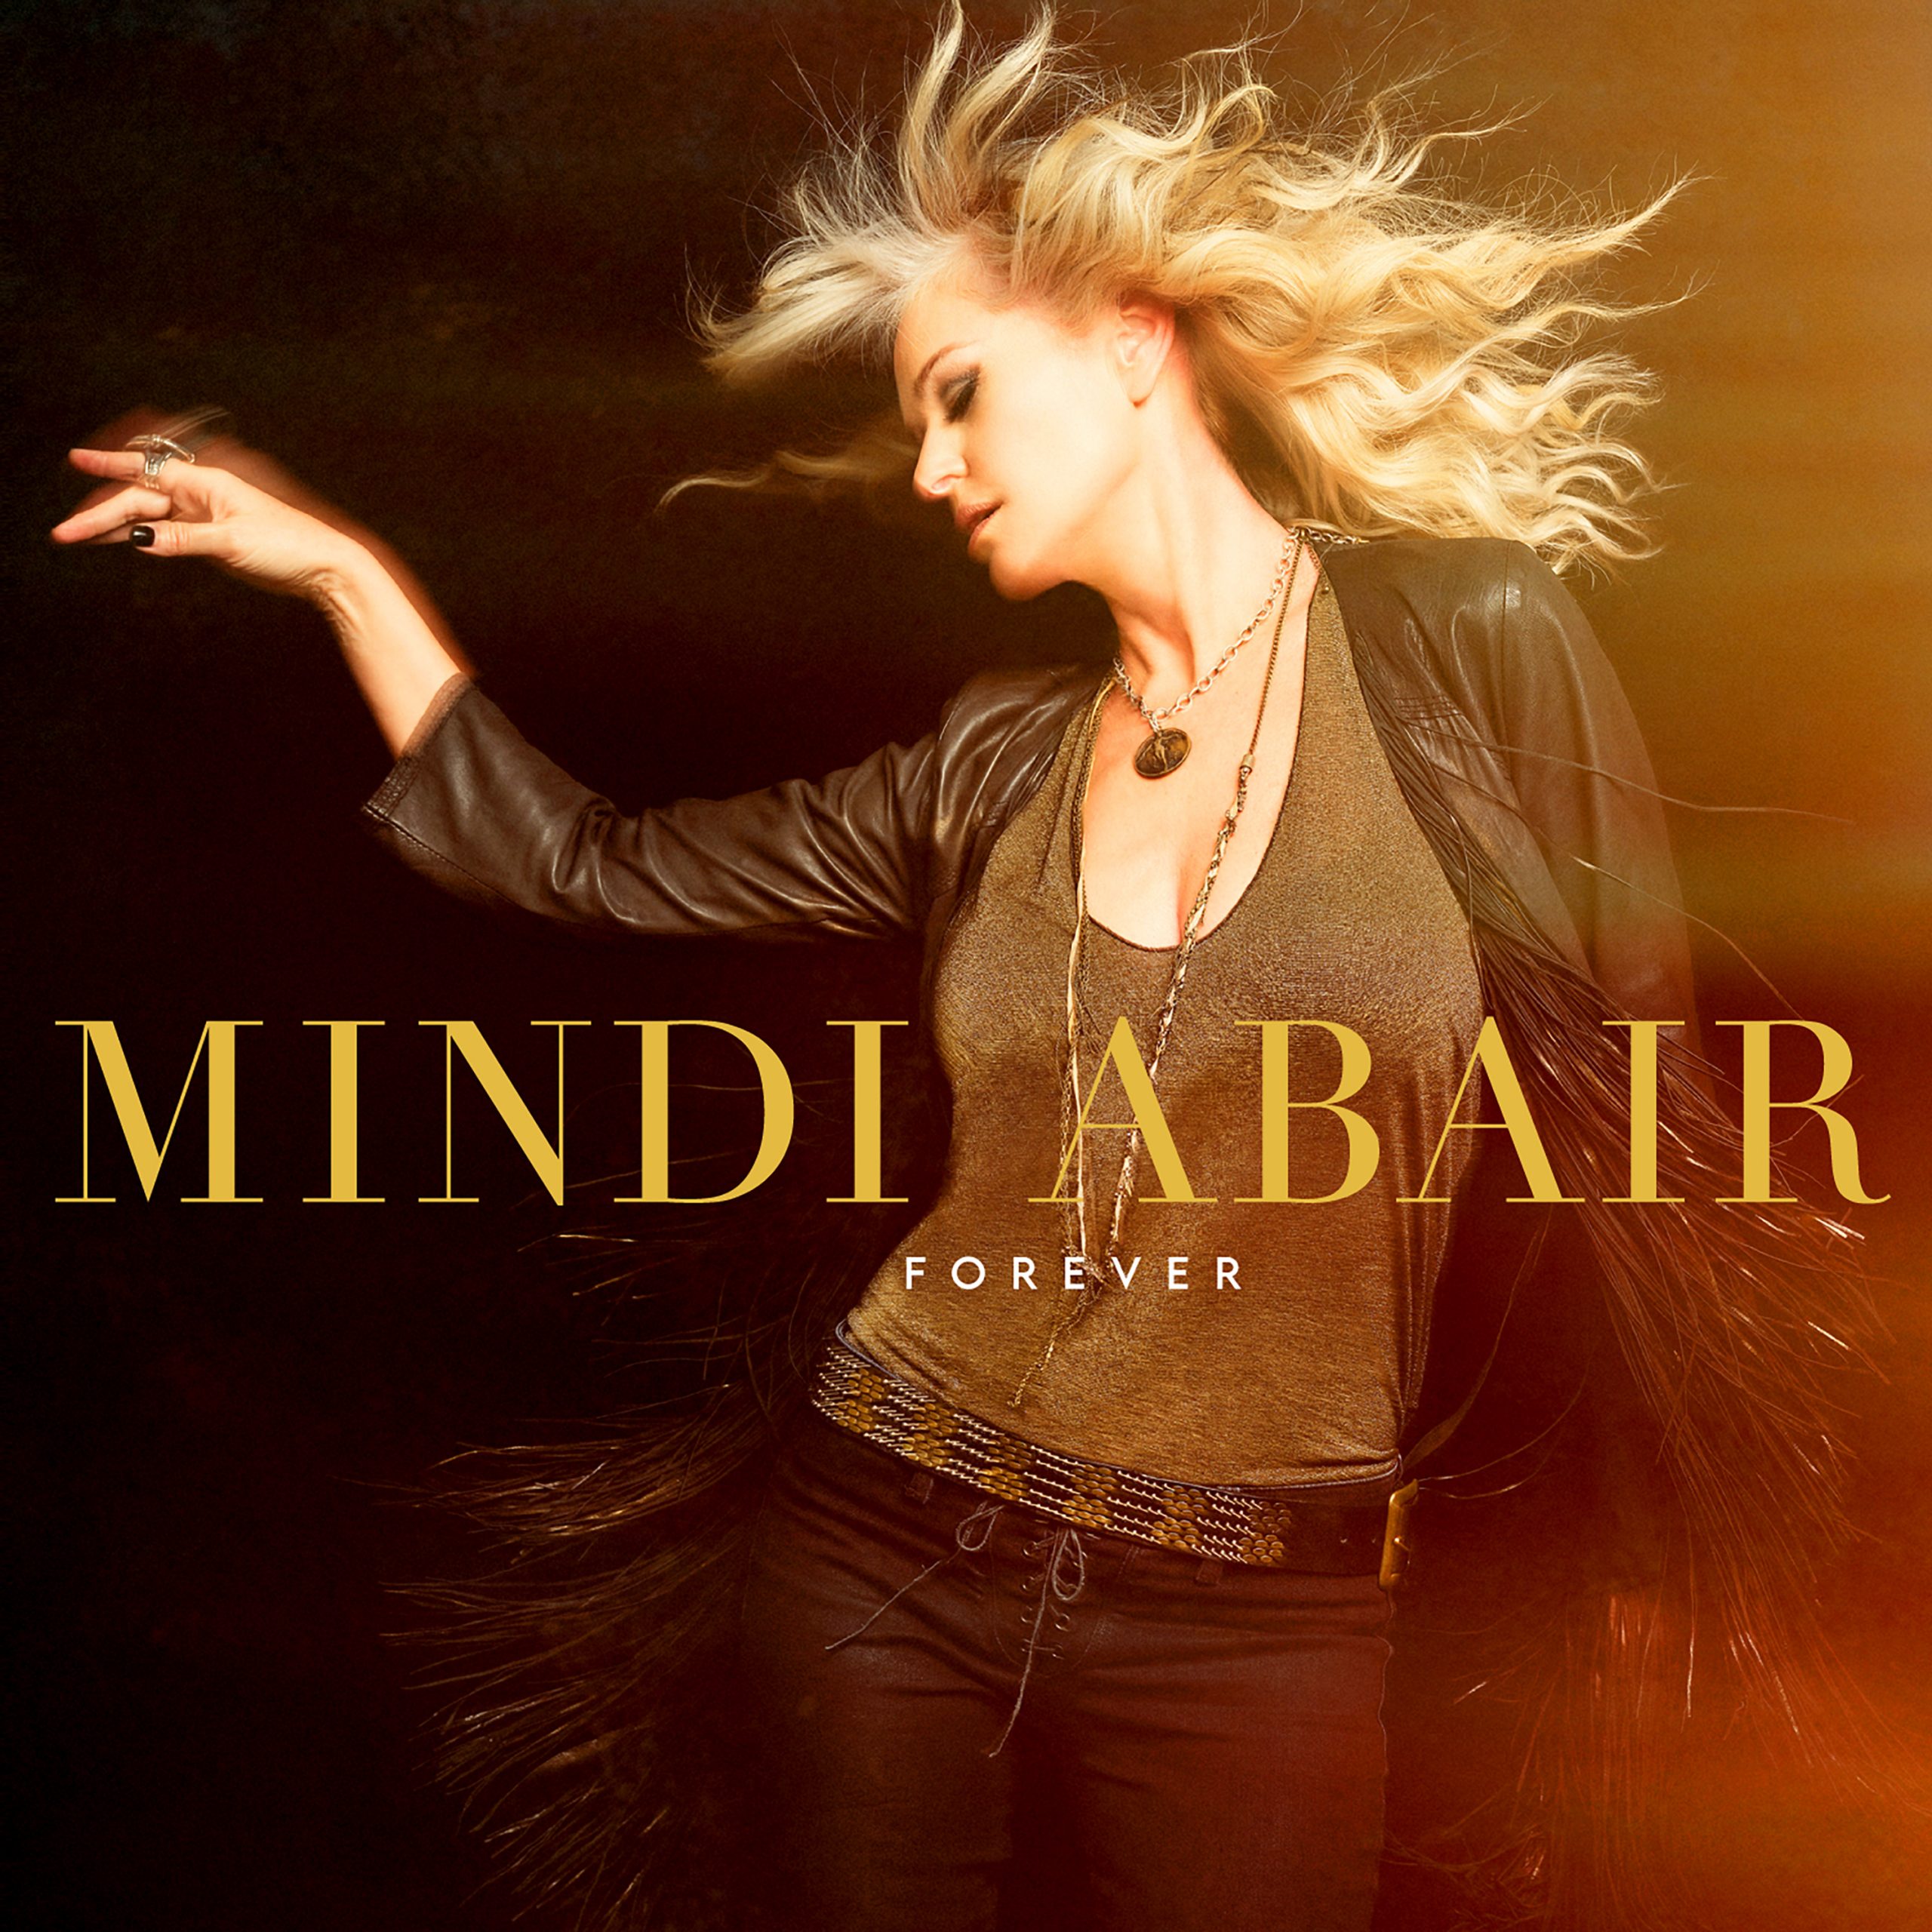 Cover image of Mindi Abair's album; a woman dances with her hair whipping around her face.